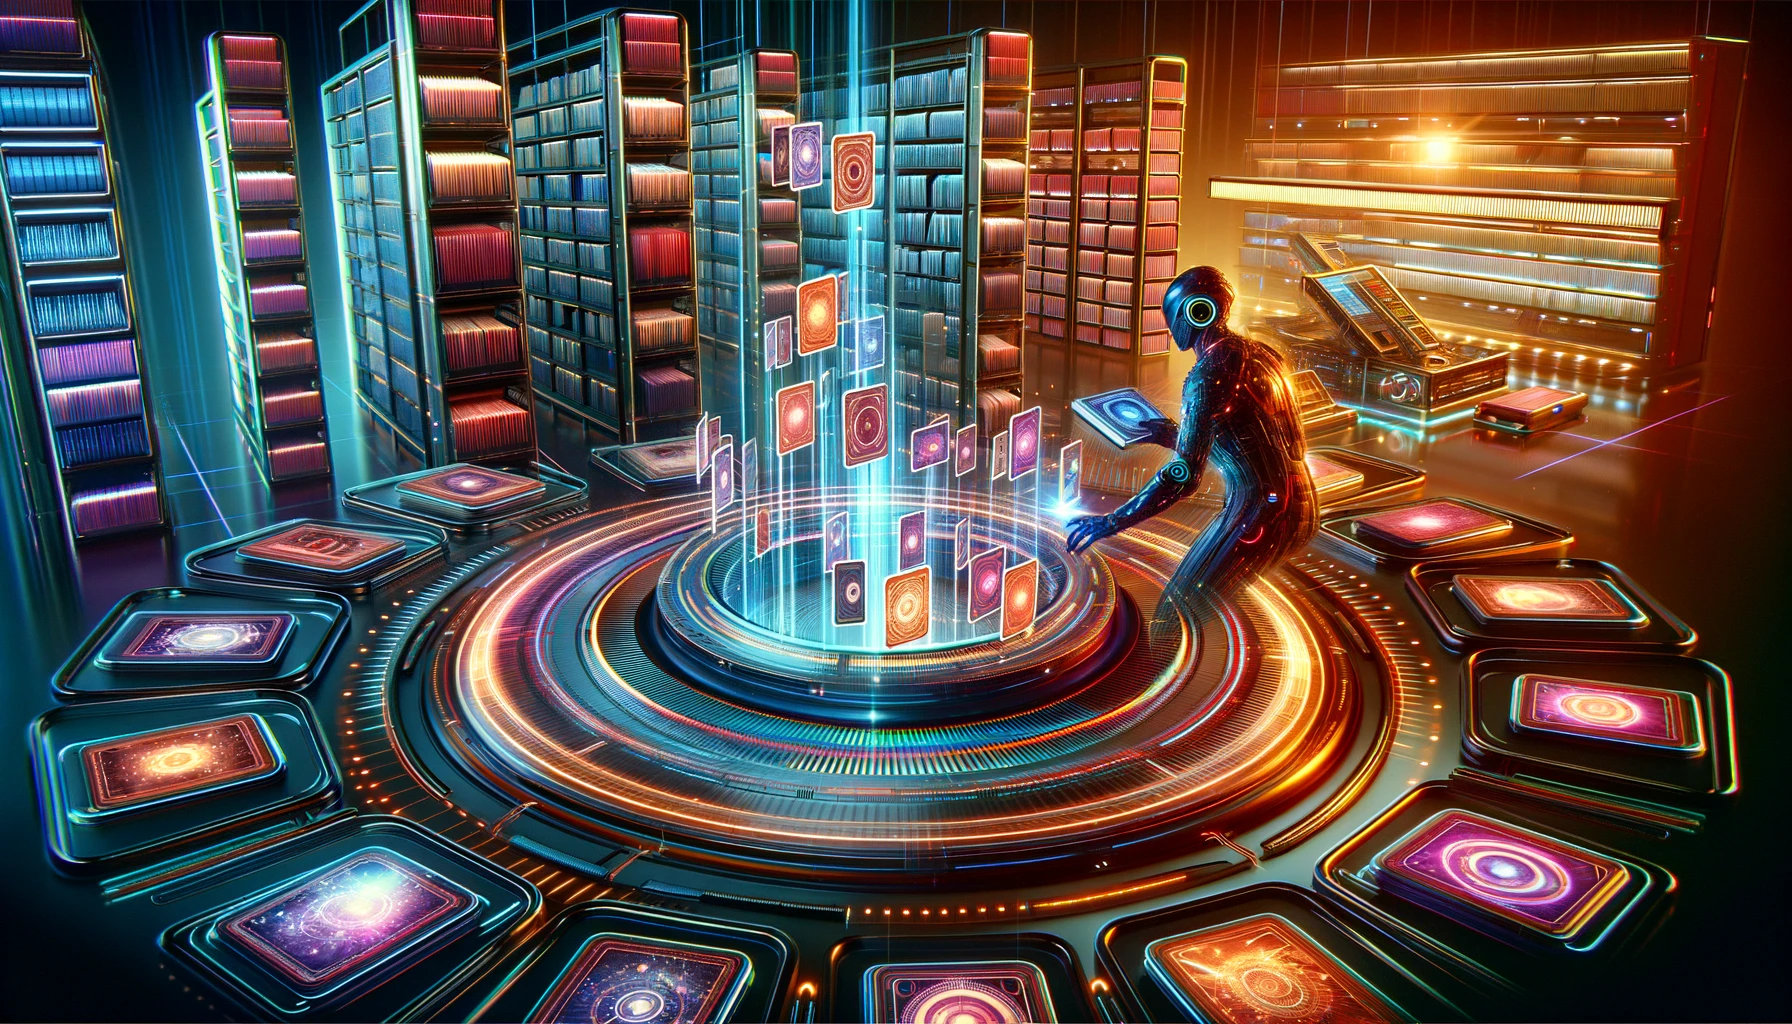 A wide-format image showcasing a futuristic figure strategically selecting cards from a high-tech archive, with vibrant holographic displays and glowing card columns in a control room setting.